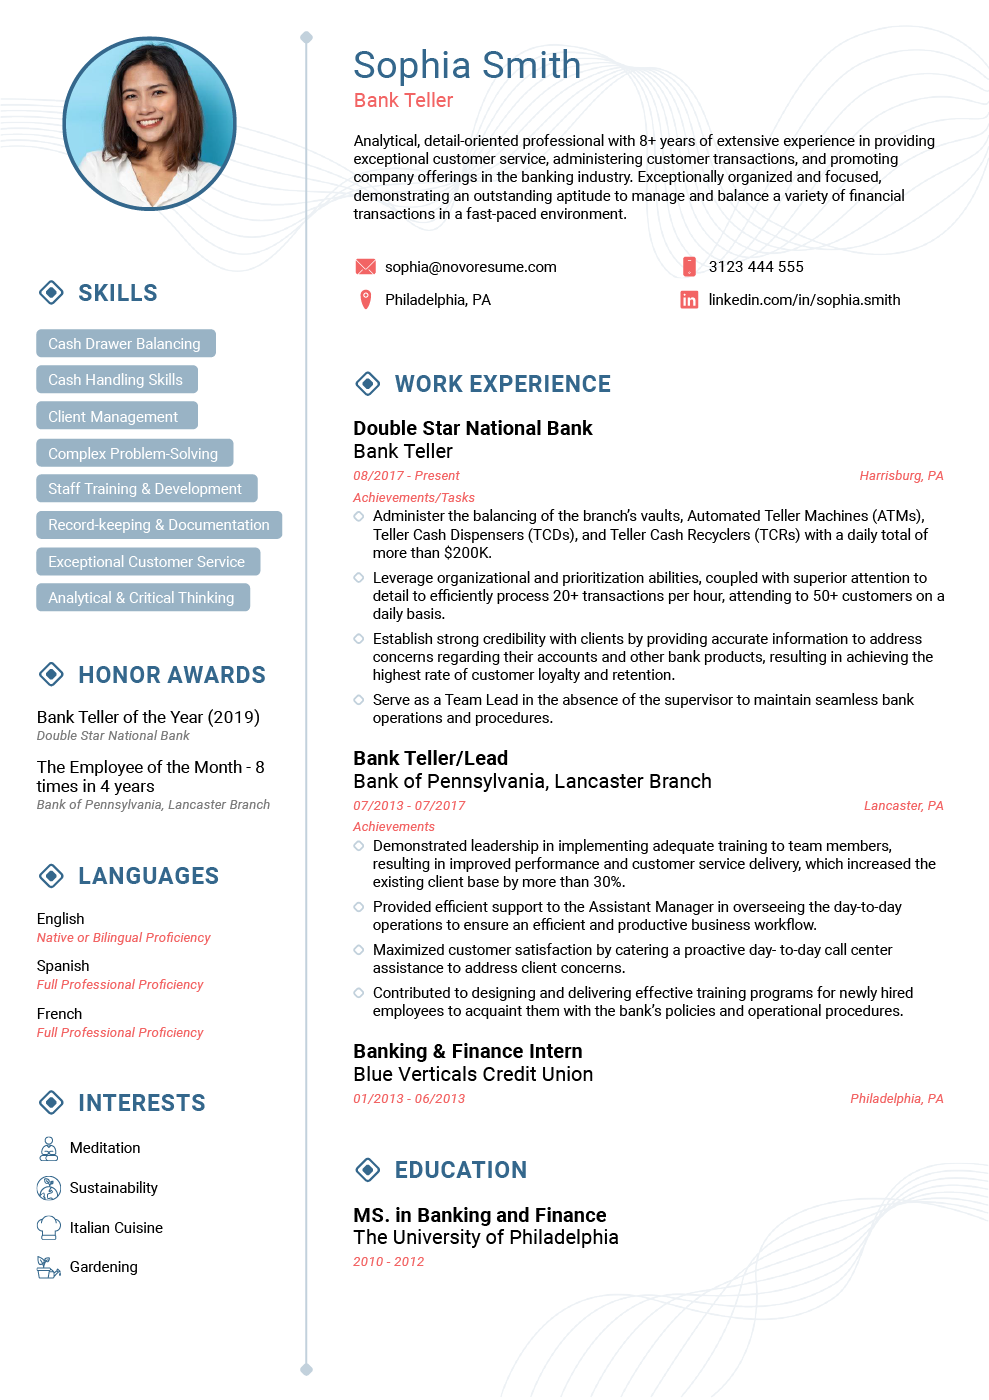 Read This Controversial Article And Find Out More About resume